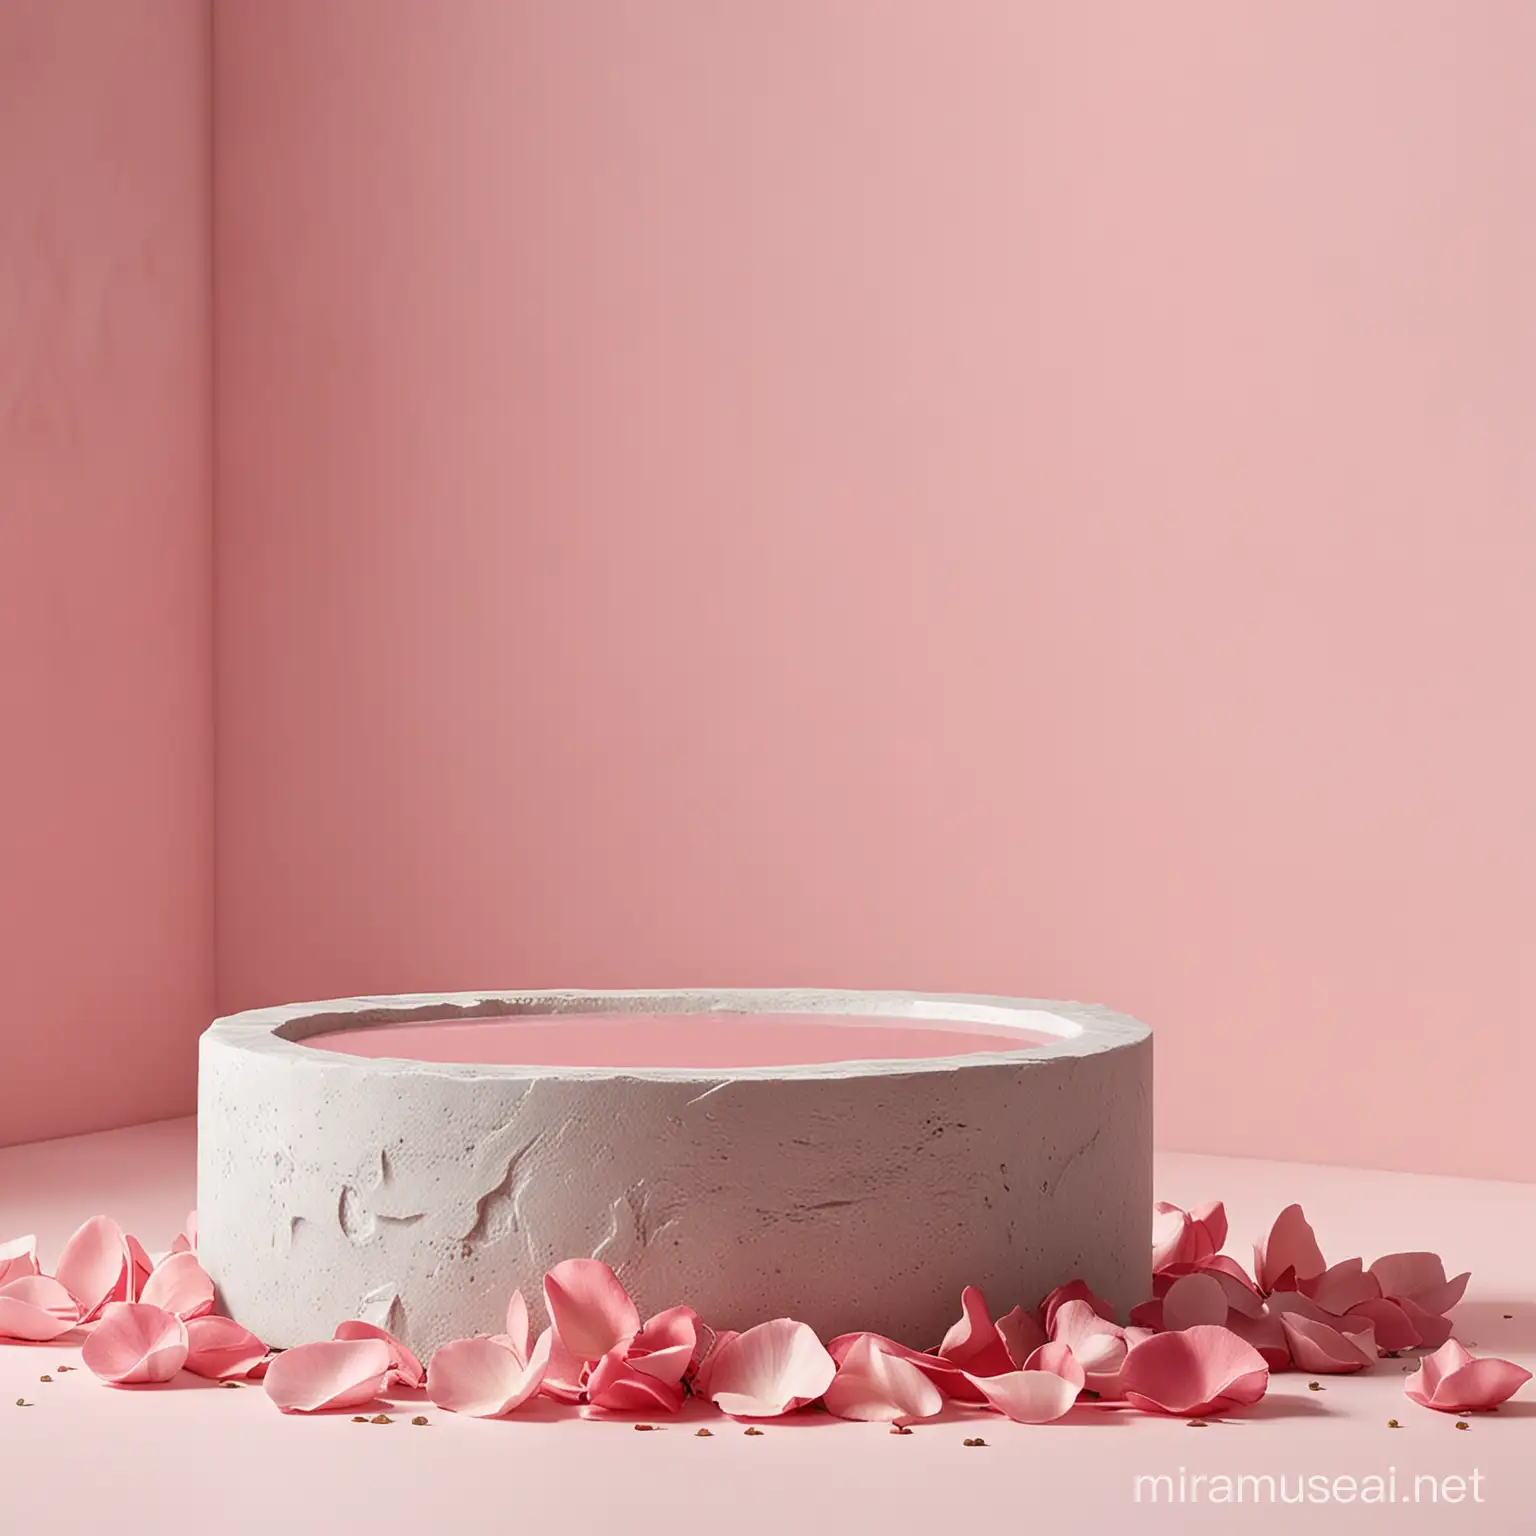 Frontal shot, highly realistic composition for a cosmetic product shoot, space for product and its packaging, featuring a gray-white stone circular base in the middle, occupying about 1/4 of the shot, with empty space on it, scattered around are light red rose petals, with a pastel pink wall adorned with decorative elements in the background, all in white, light pink, and gold accents.